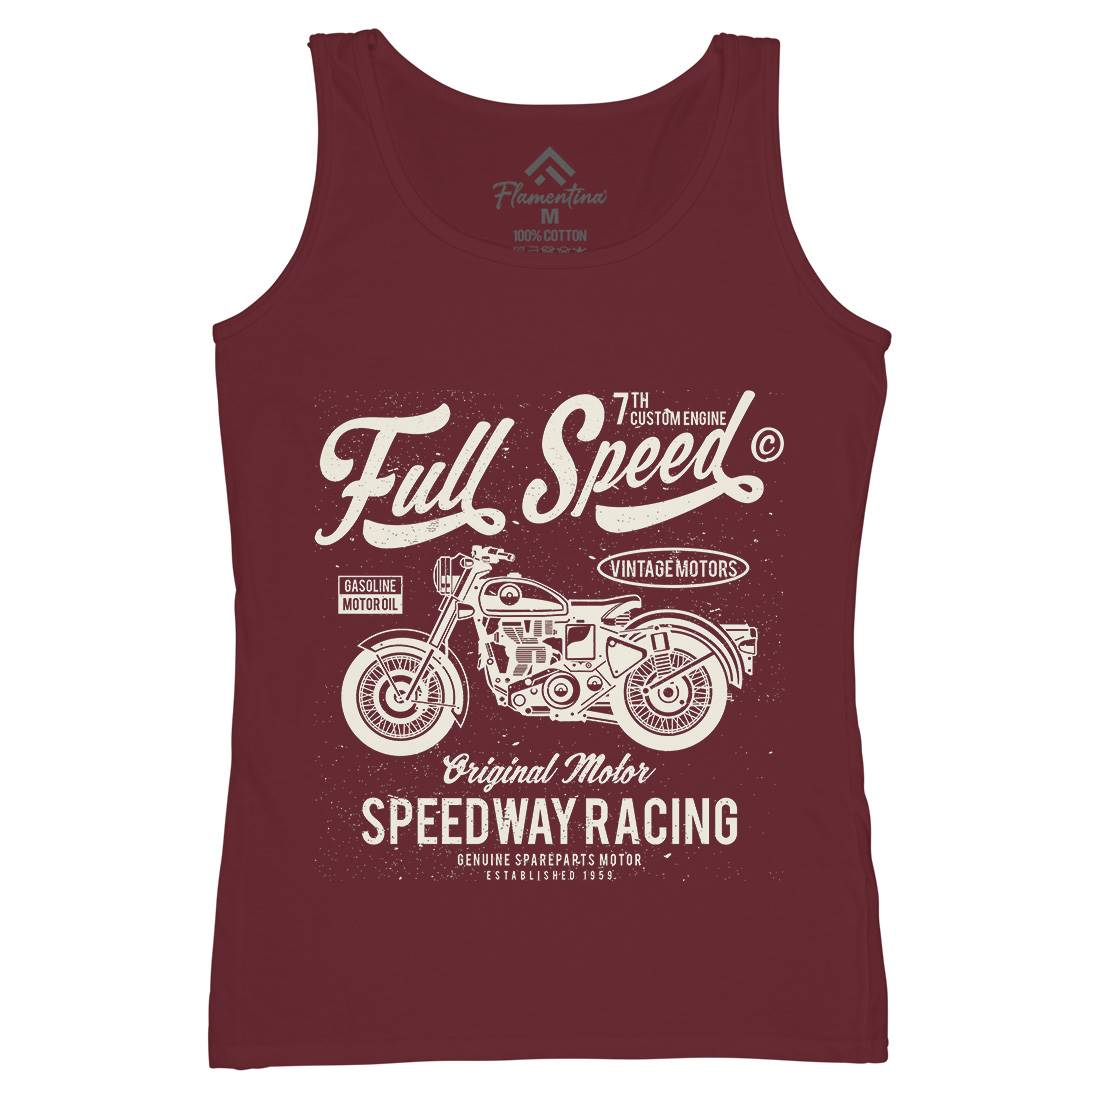 Full Speed Womens Organic Tank Top Vest Motorcycles A056